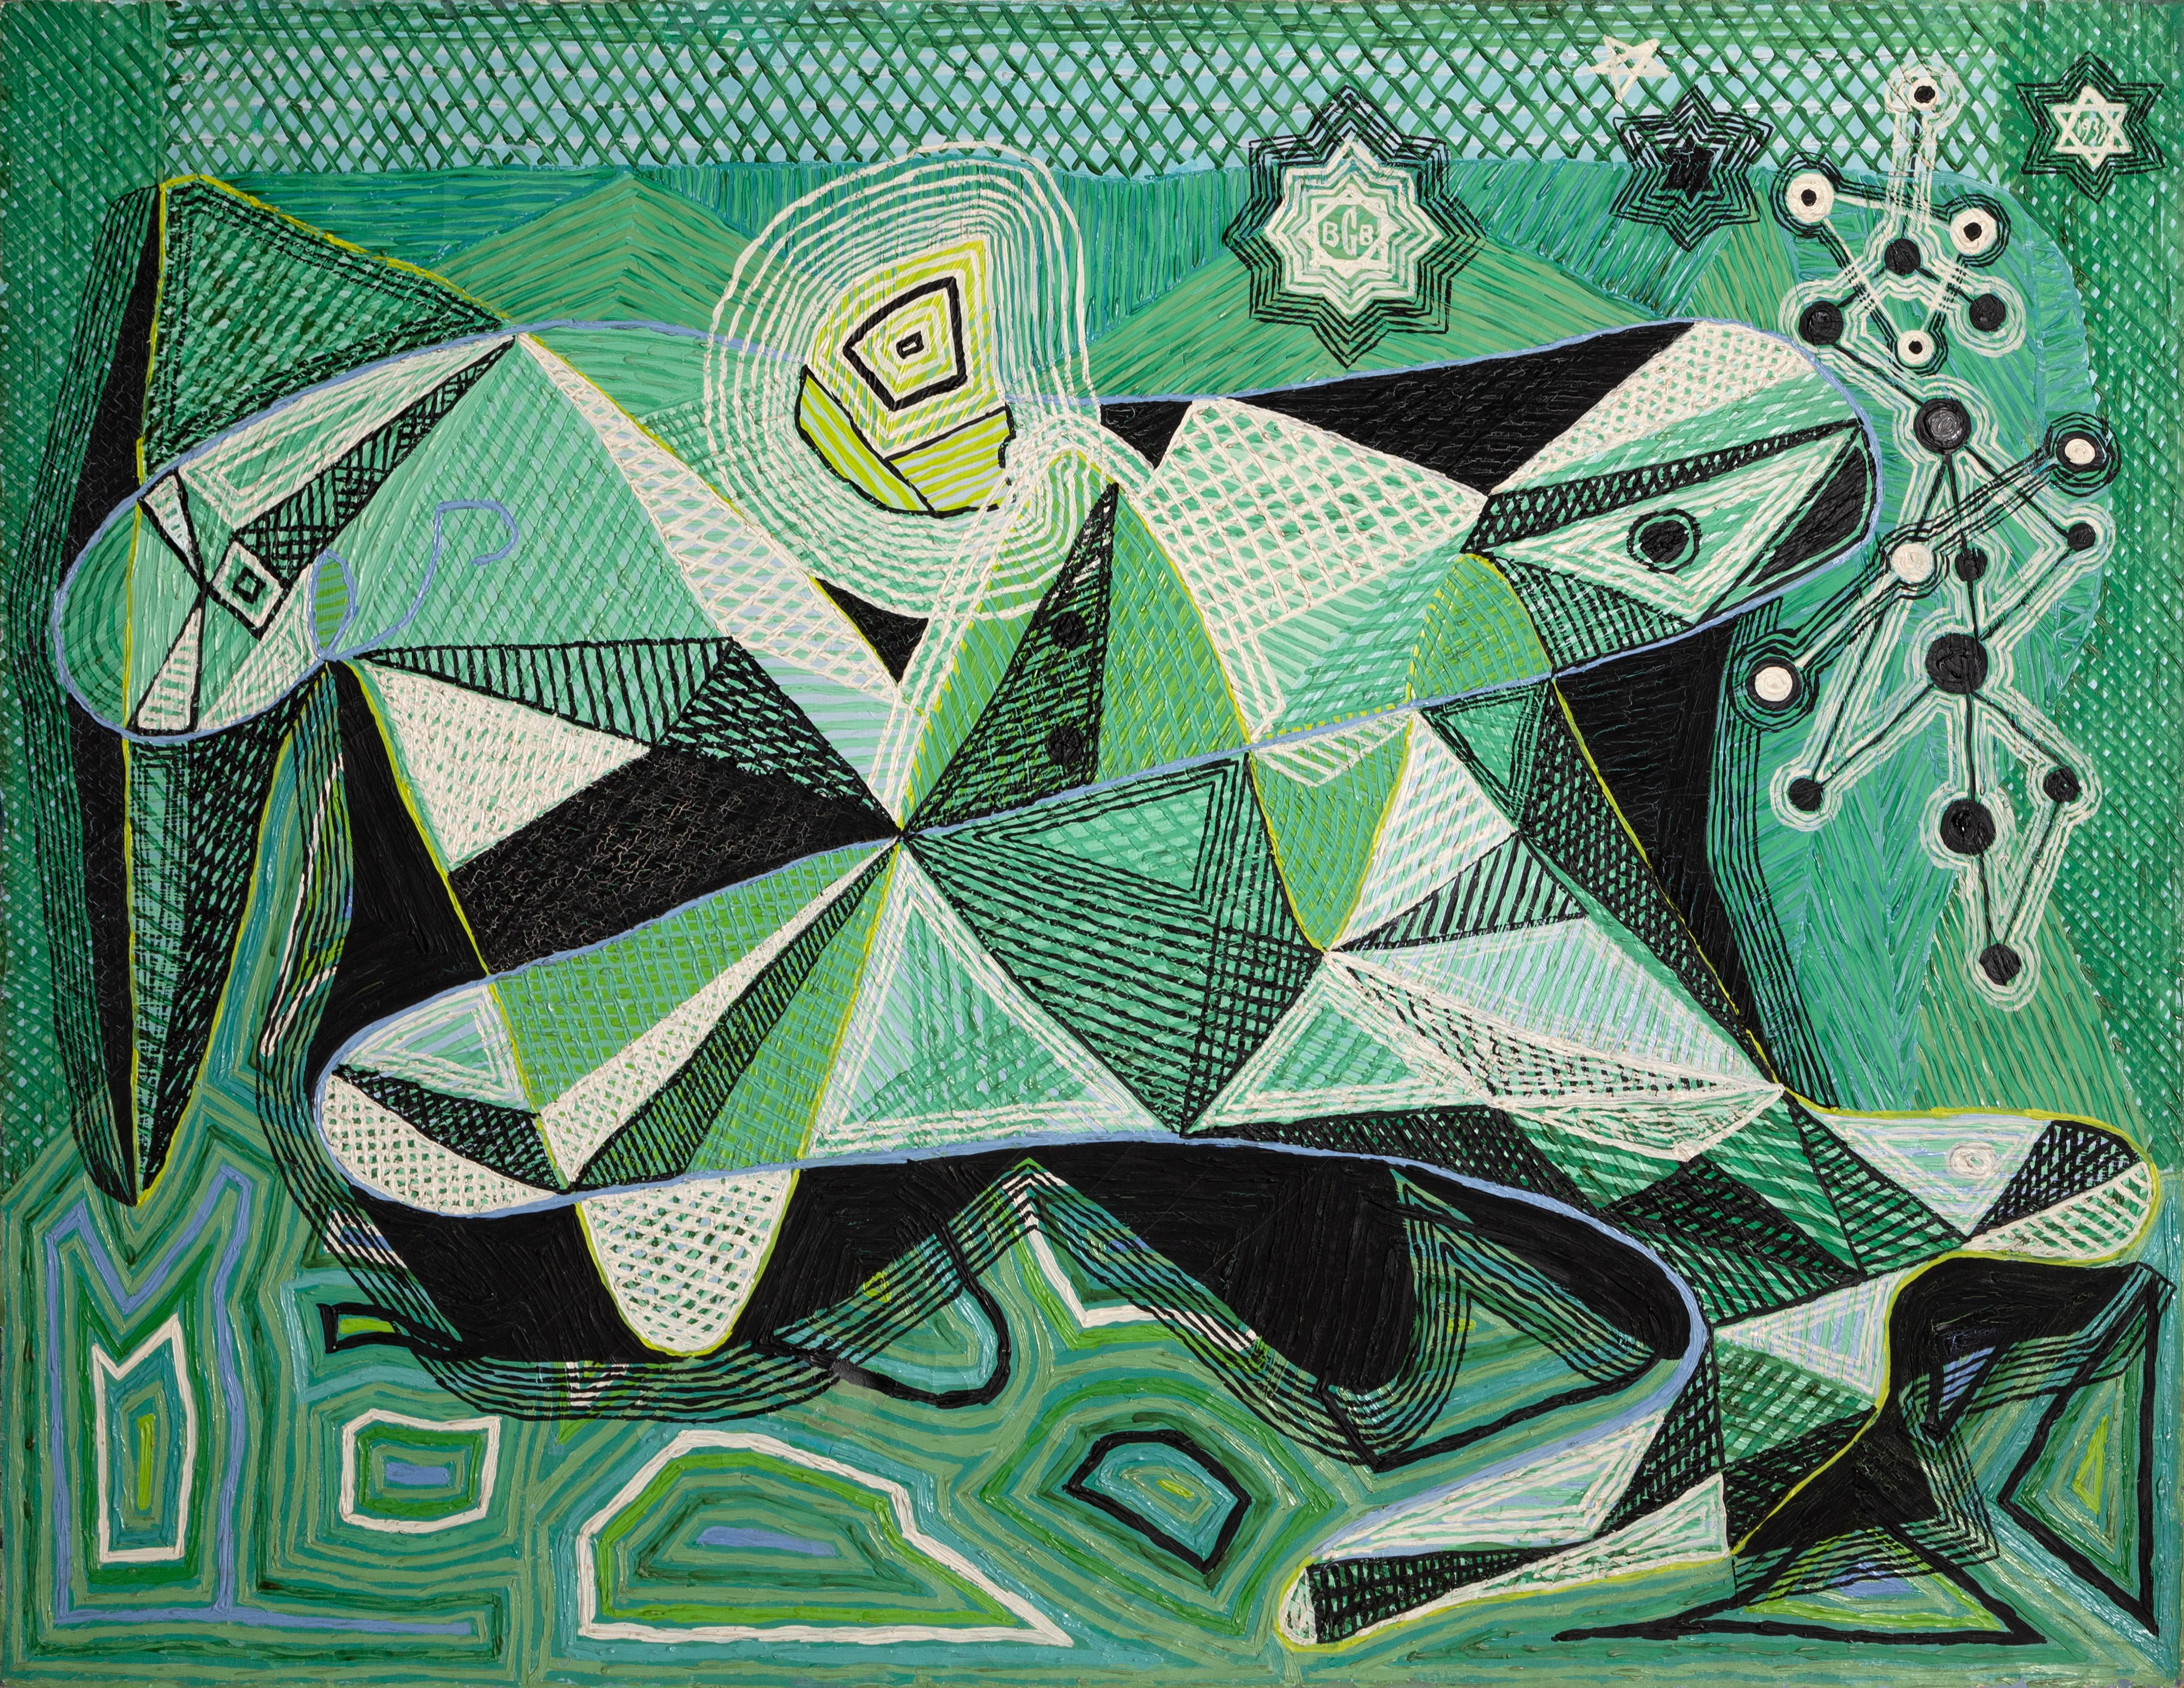 Benjamin G. Benno Abstract Painting - An Evocation on Man and Nature, Abstract Cubist Painting by Benjamin Benno 1939